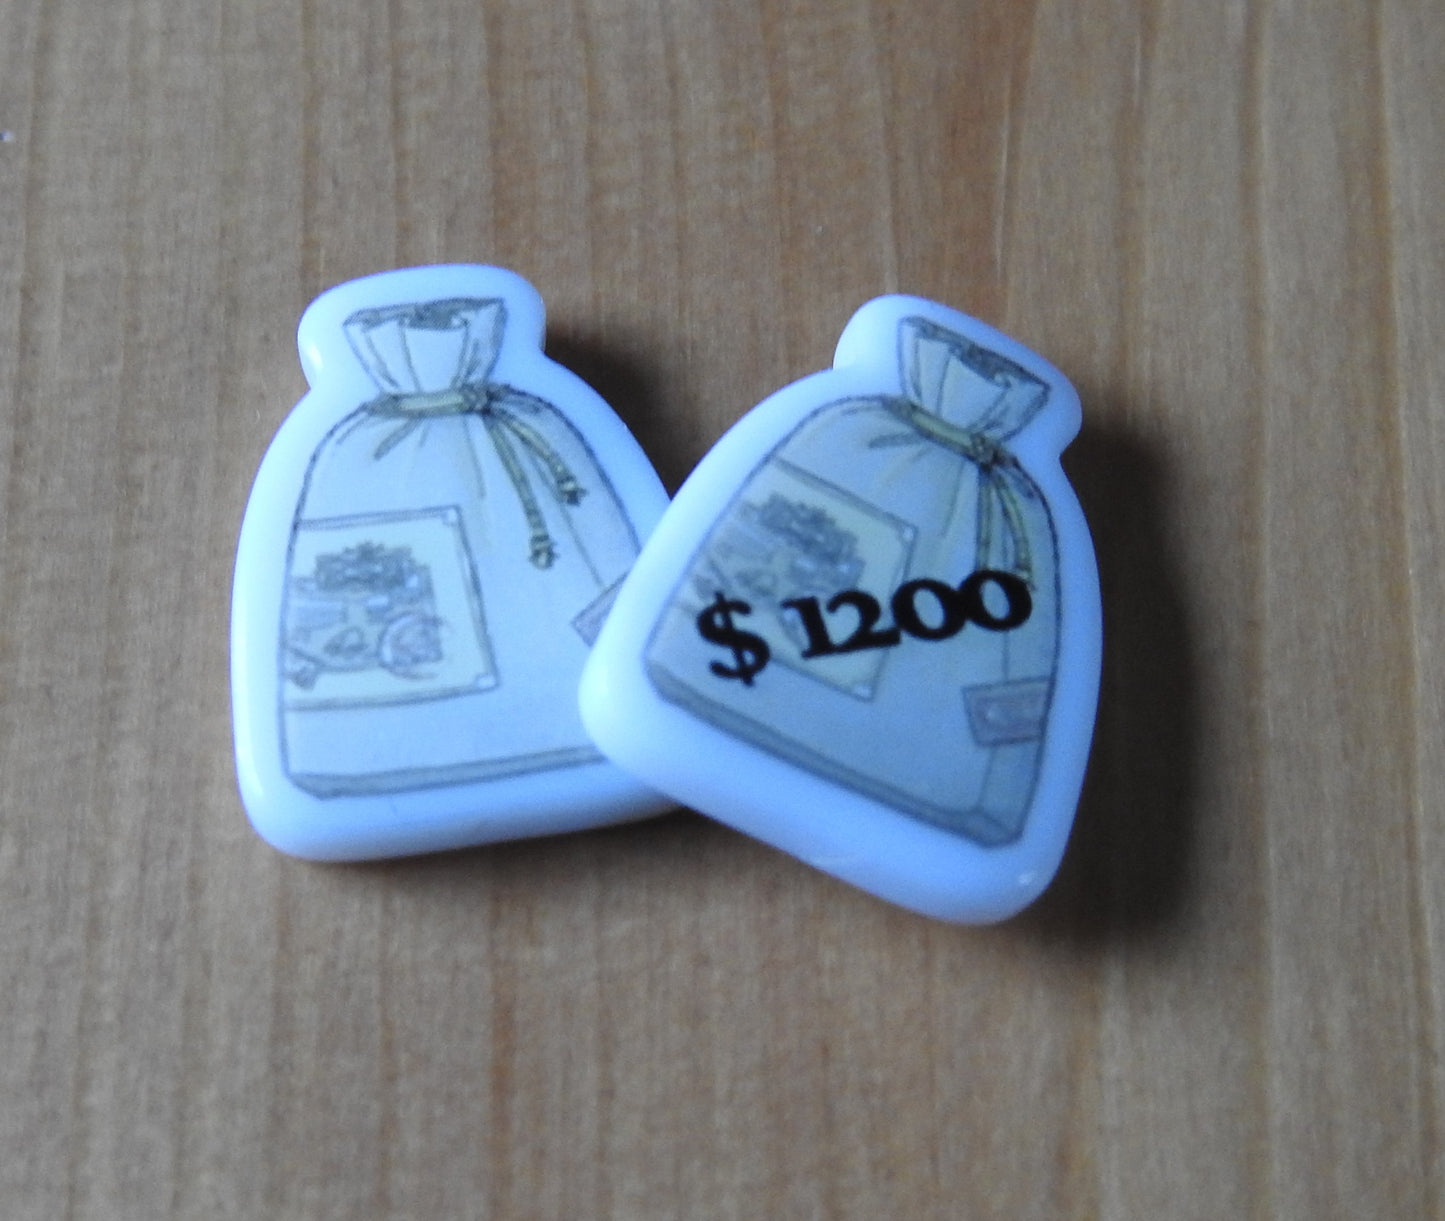 Close-up view of the 2 money bags that are included.